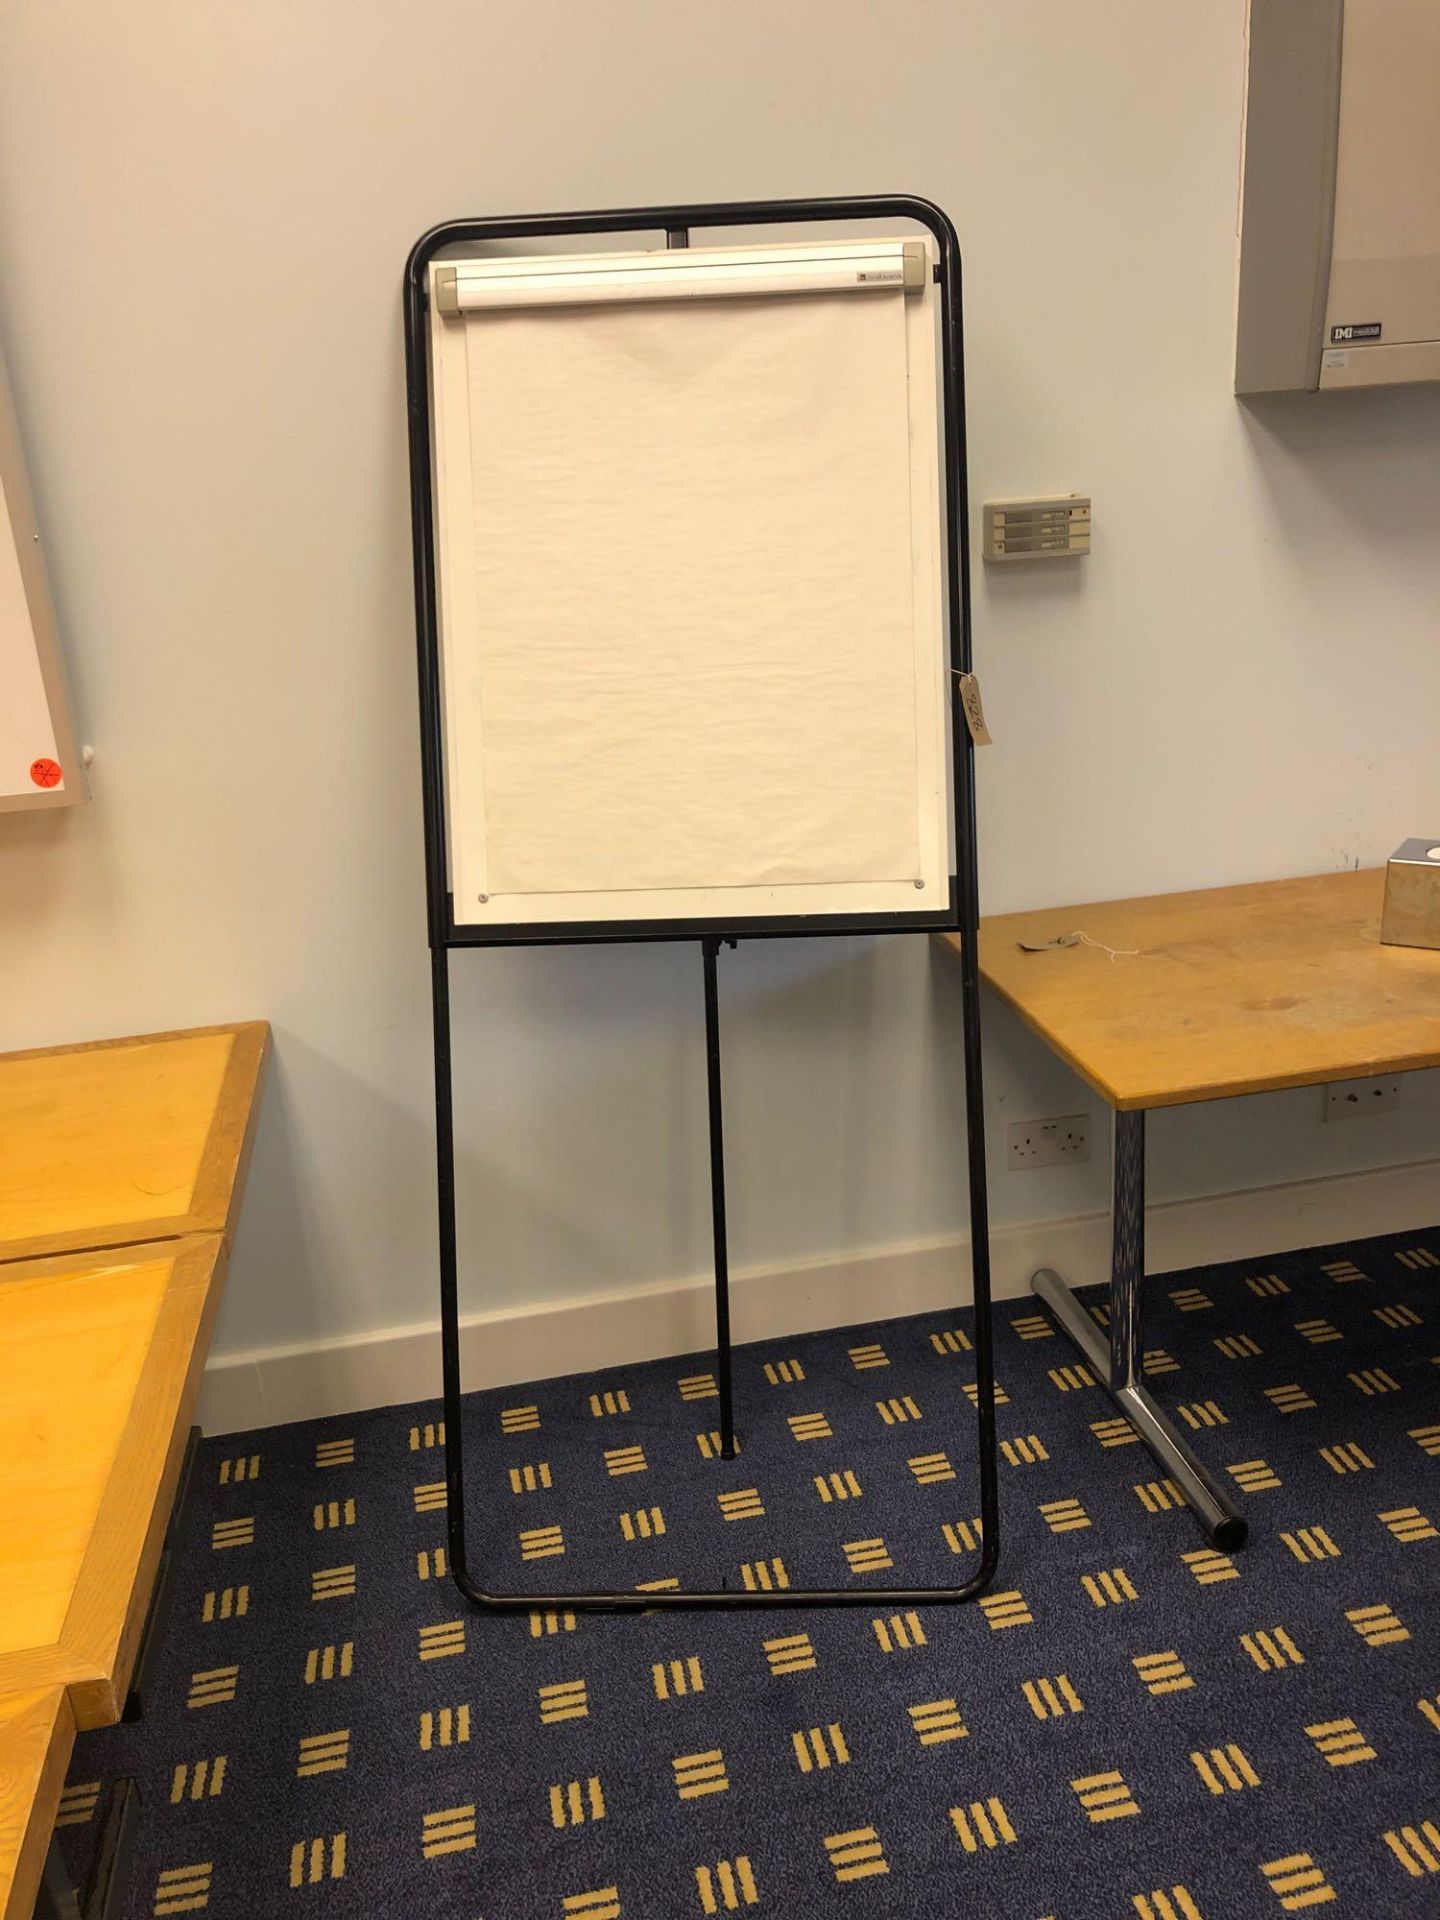 Pendax White Screen 1800 X 1350 Mm One Wall Mounted Whiteboard And One Whiteboard/Flipchart Stand - Image 3 of 3